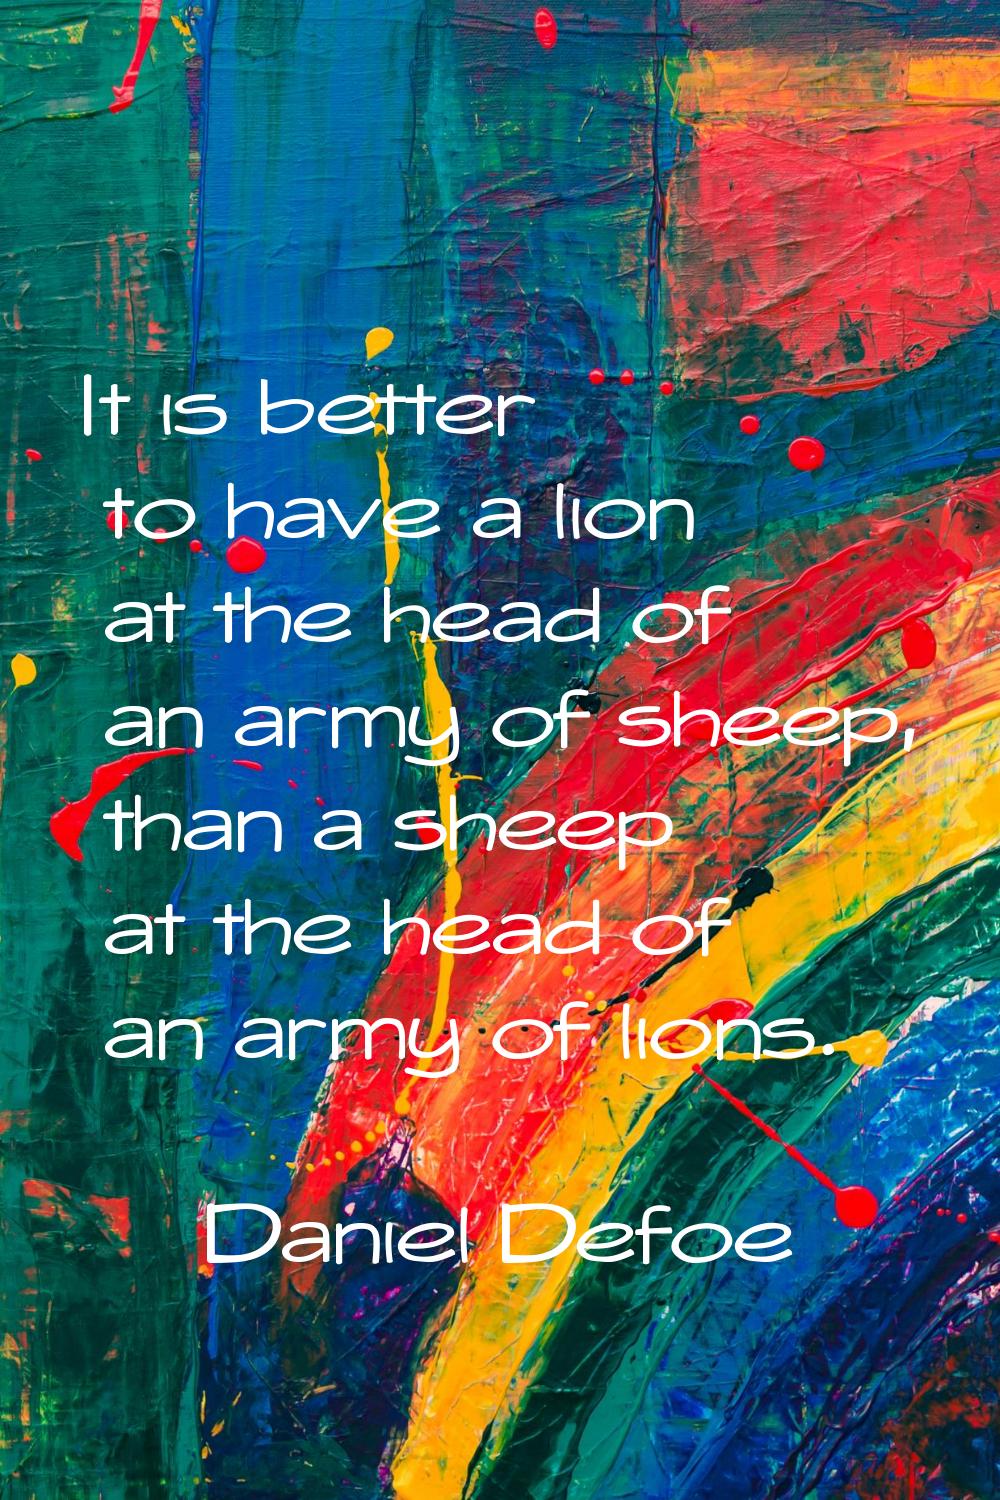 It is better to have a lion at the head of an army of sheep, than a sheep at the head of an army of